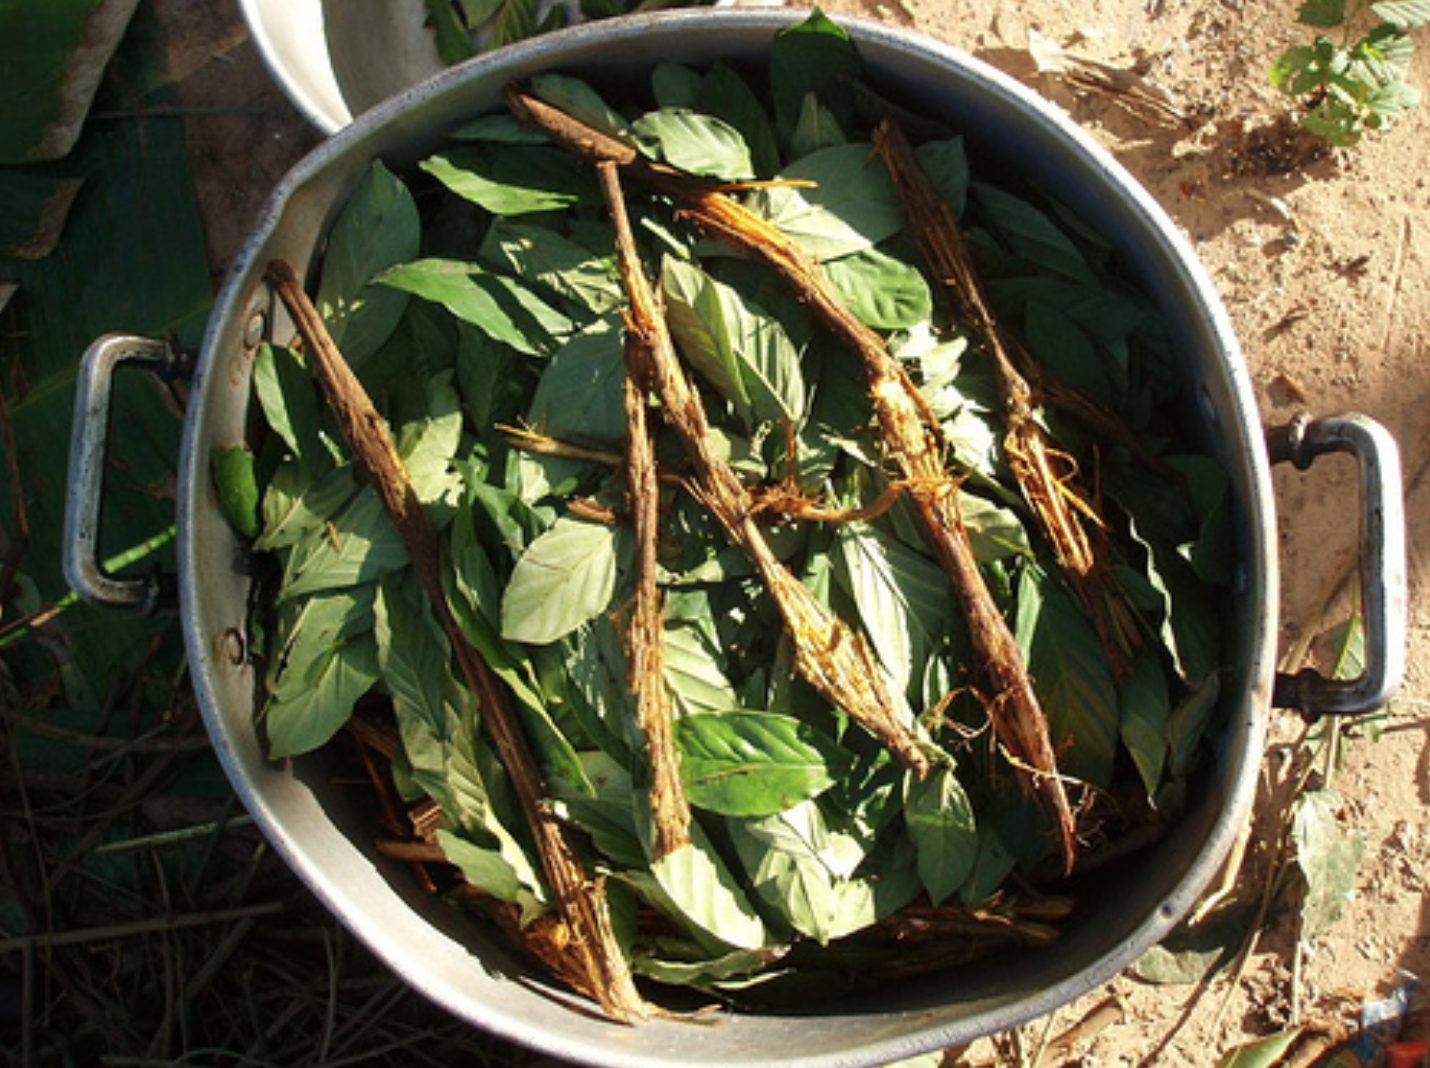 Ayahuasca: This Amazonian Brew May Be the Most Powerful Antidepressant Ever Discovered